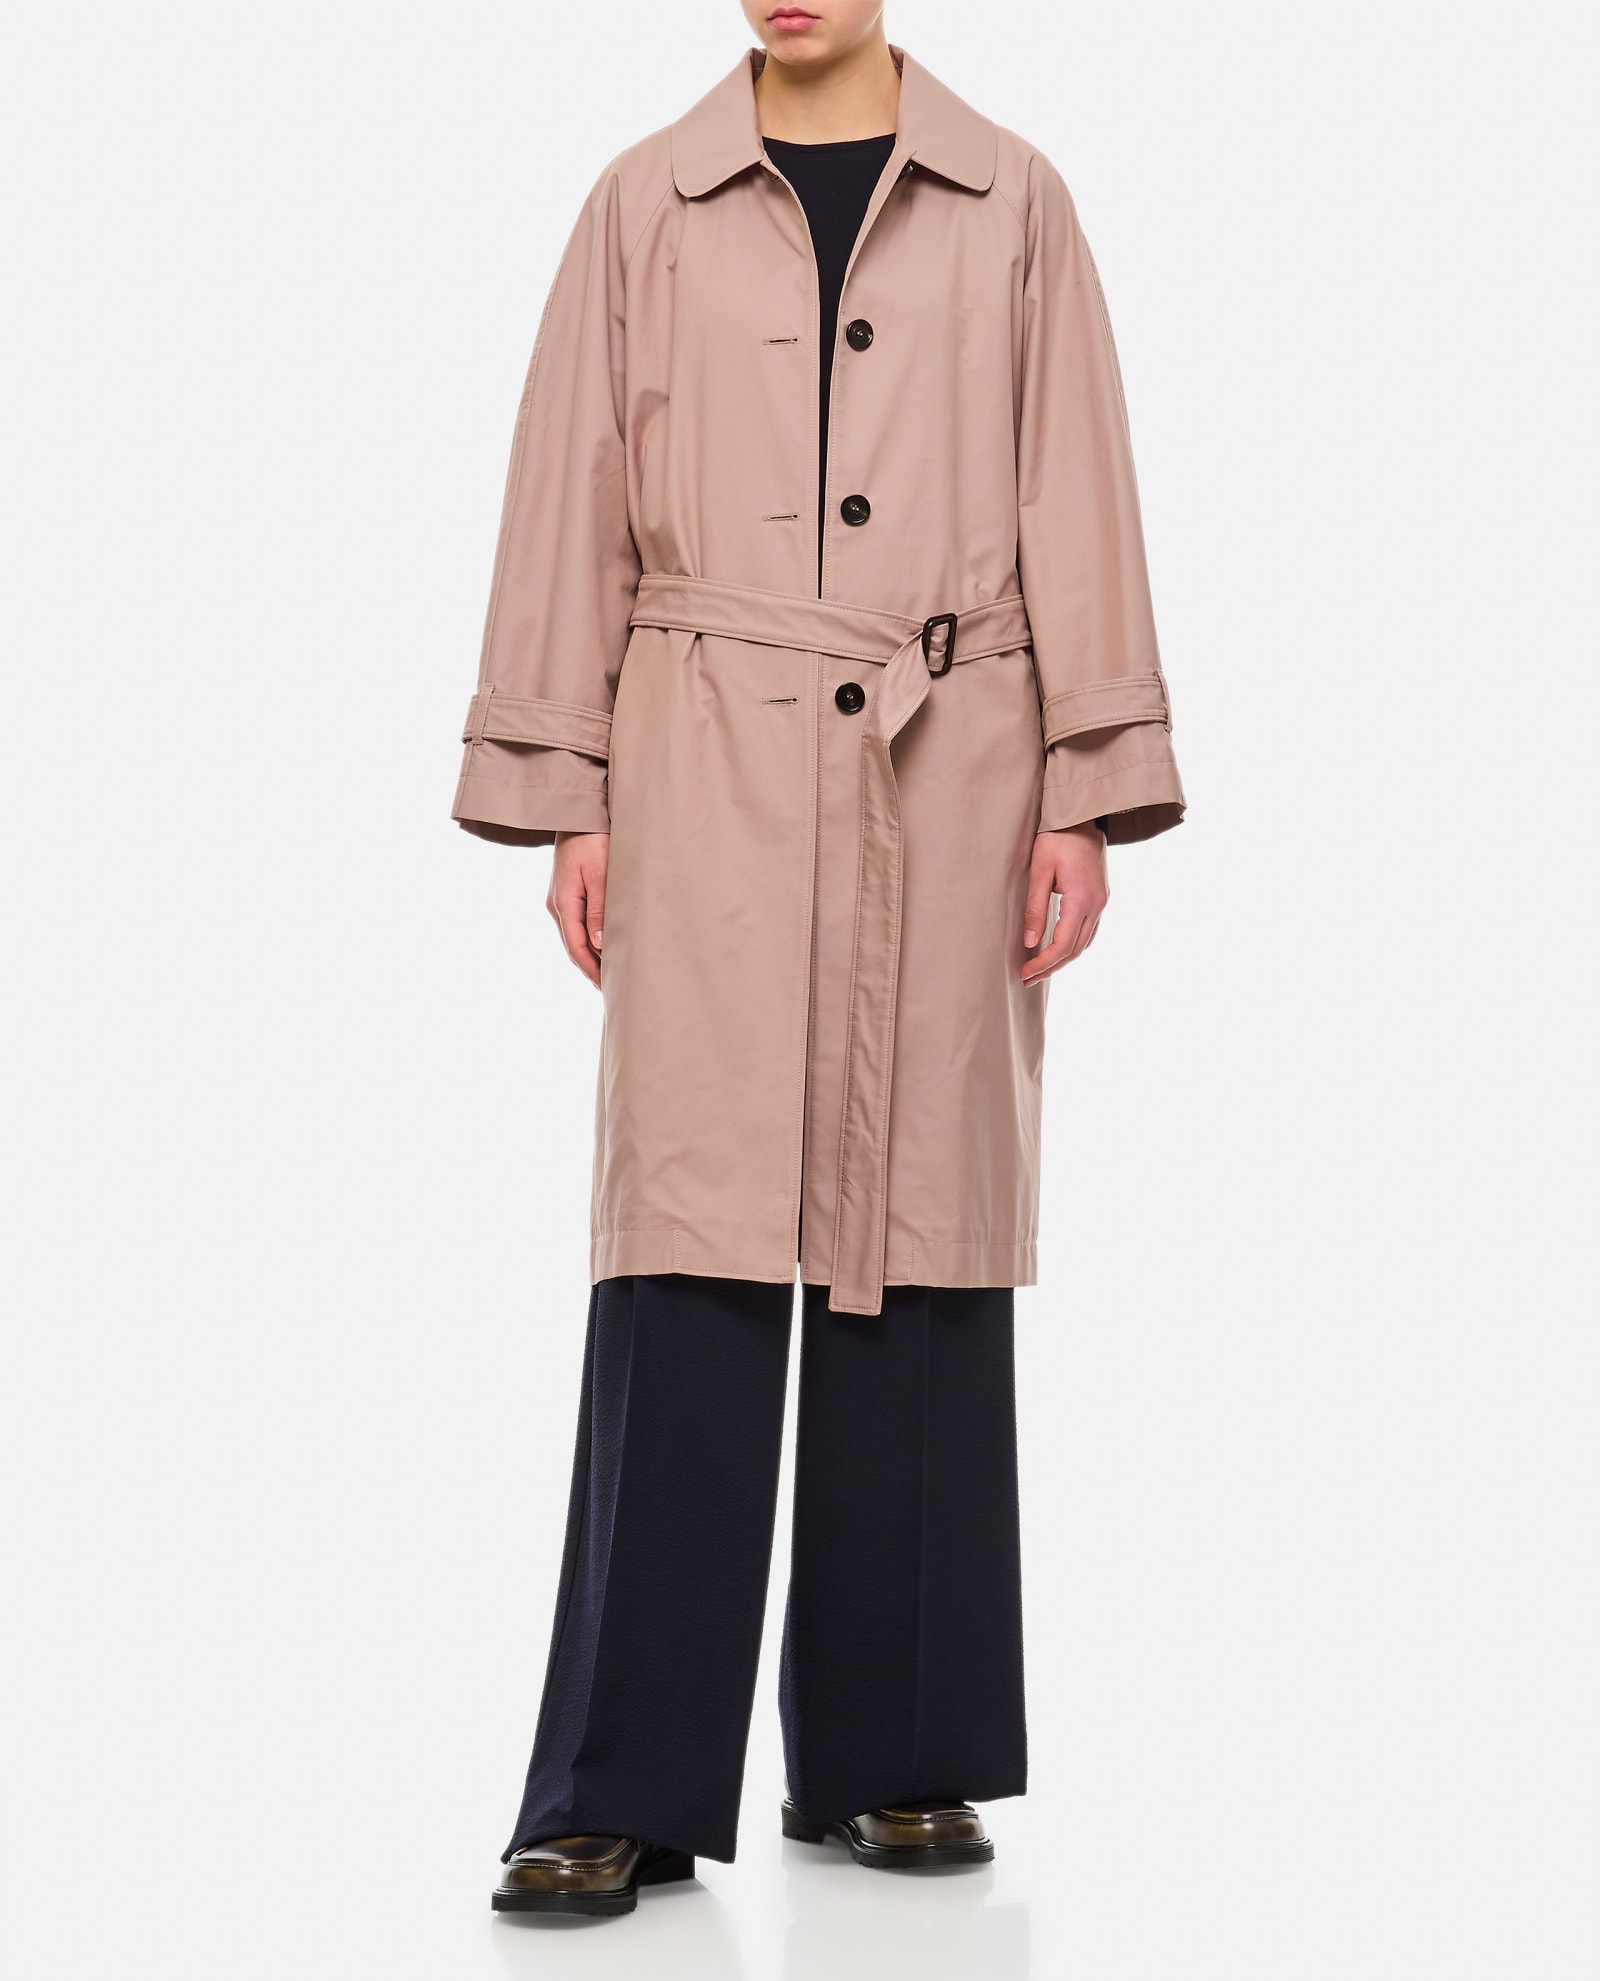 Ftrench Trench Coat